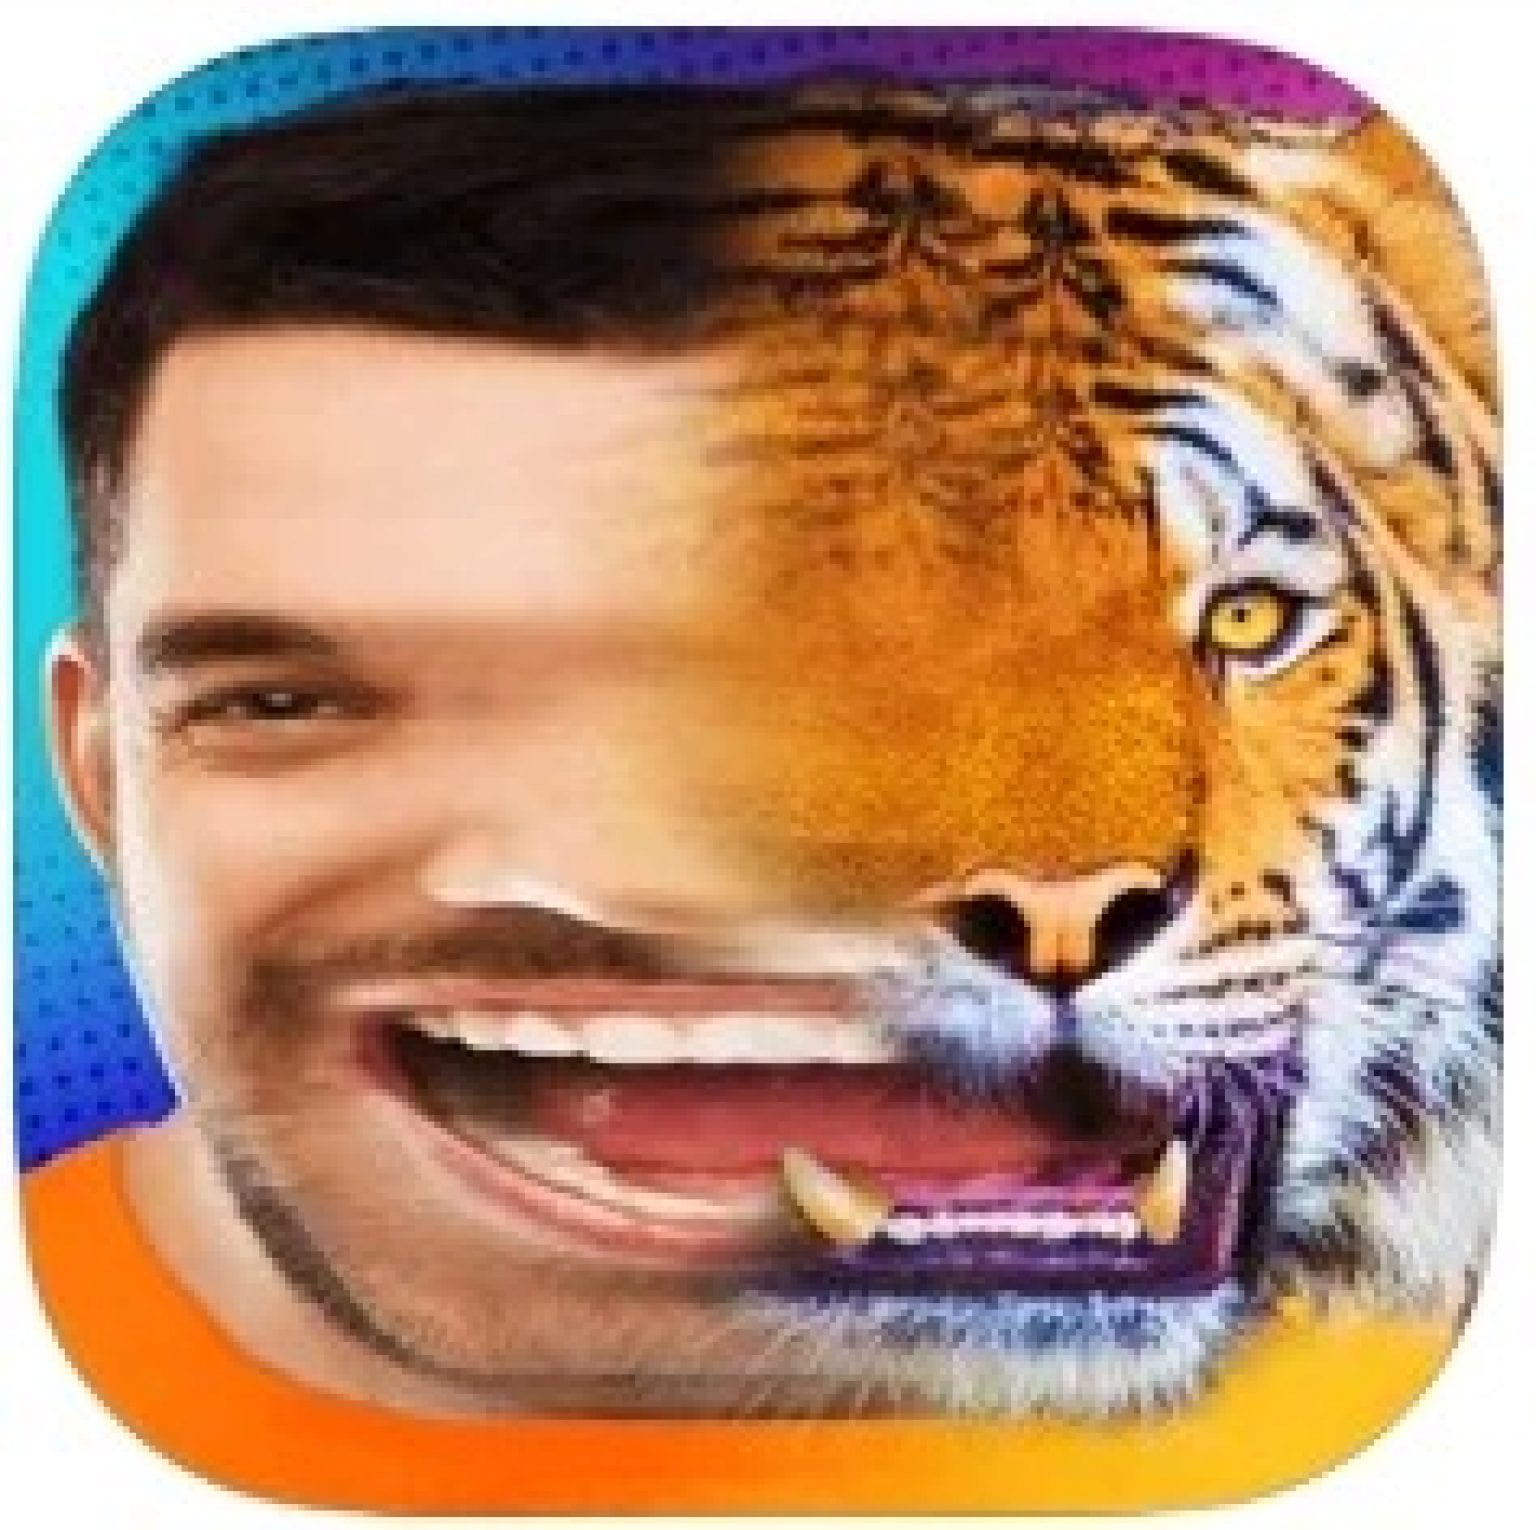 apps to morph faces